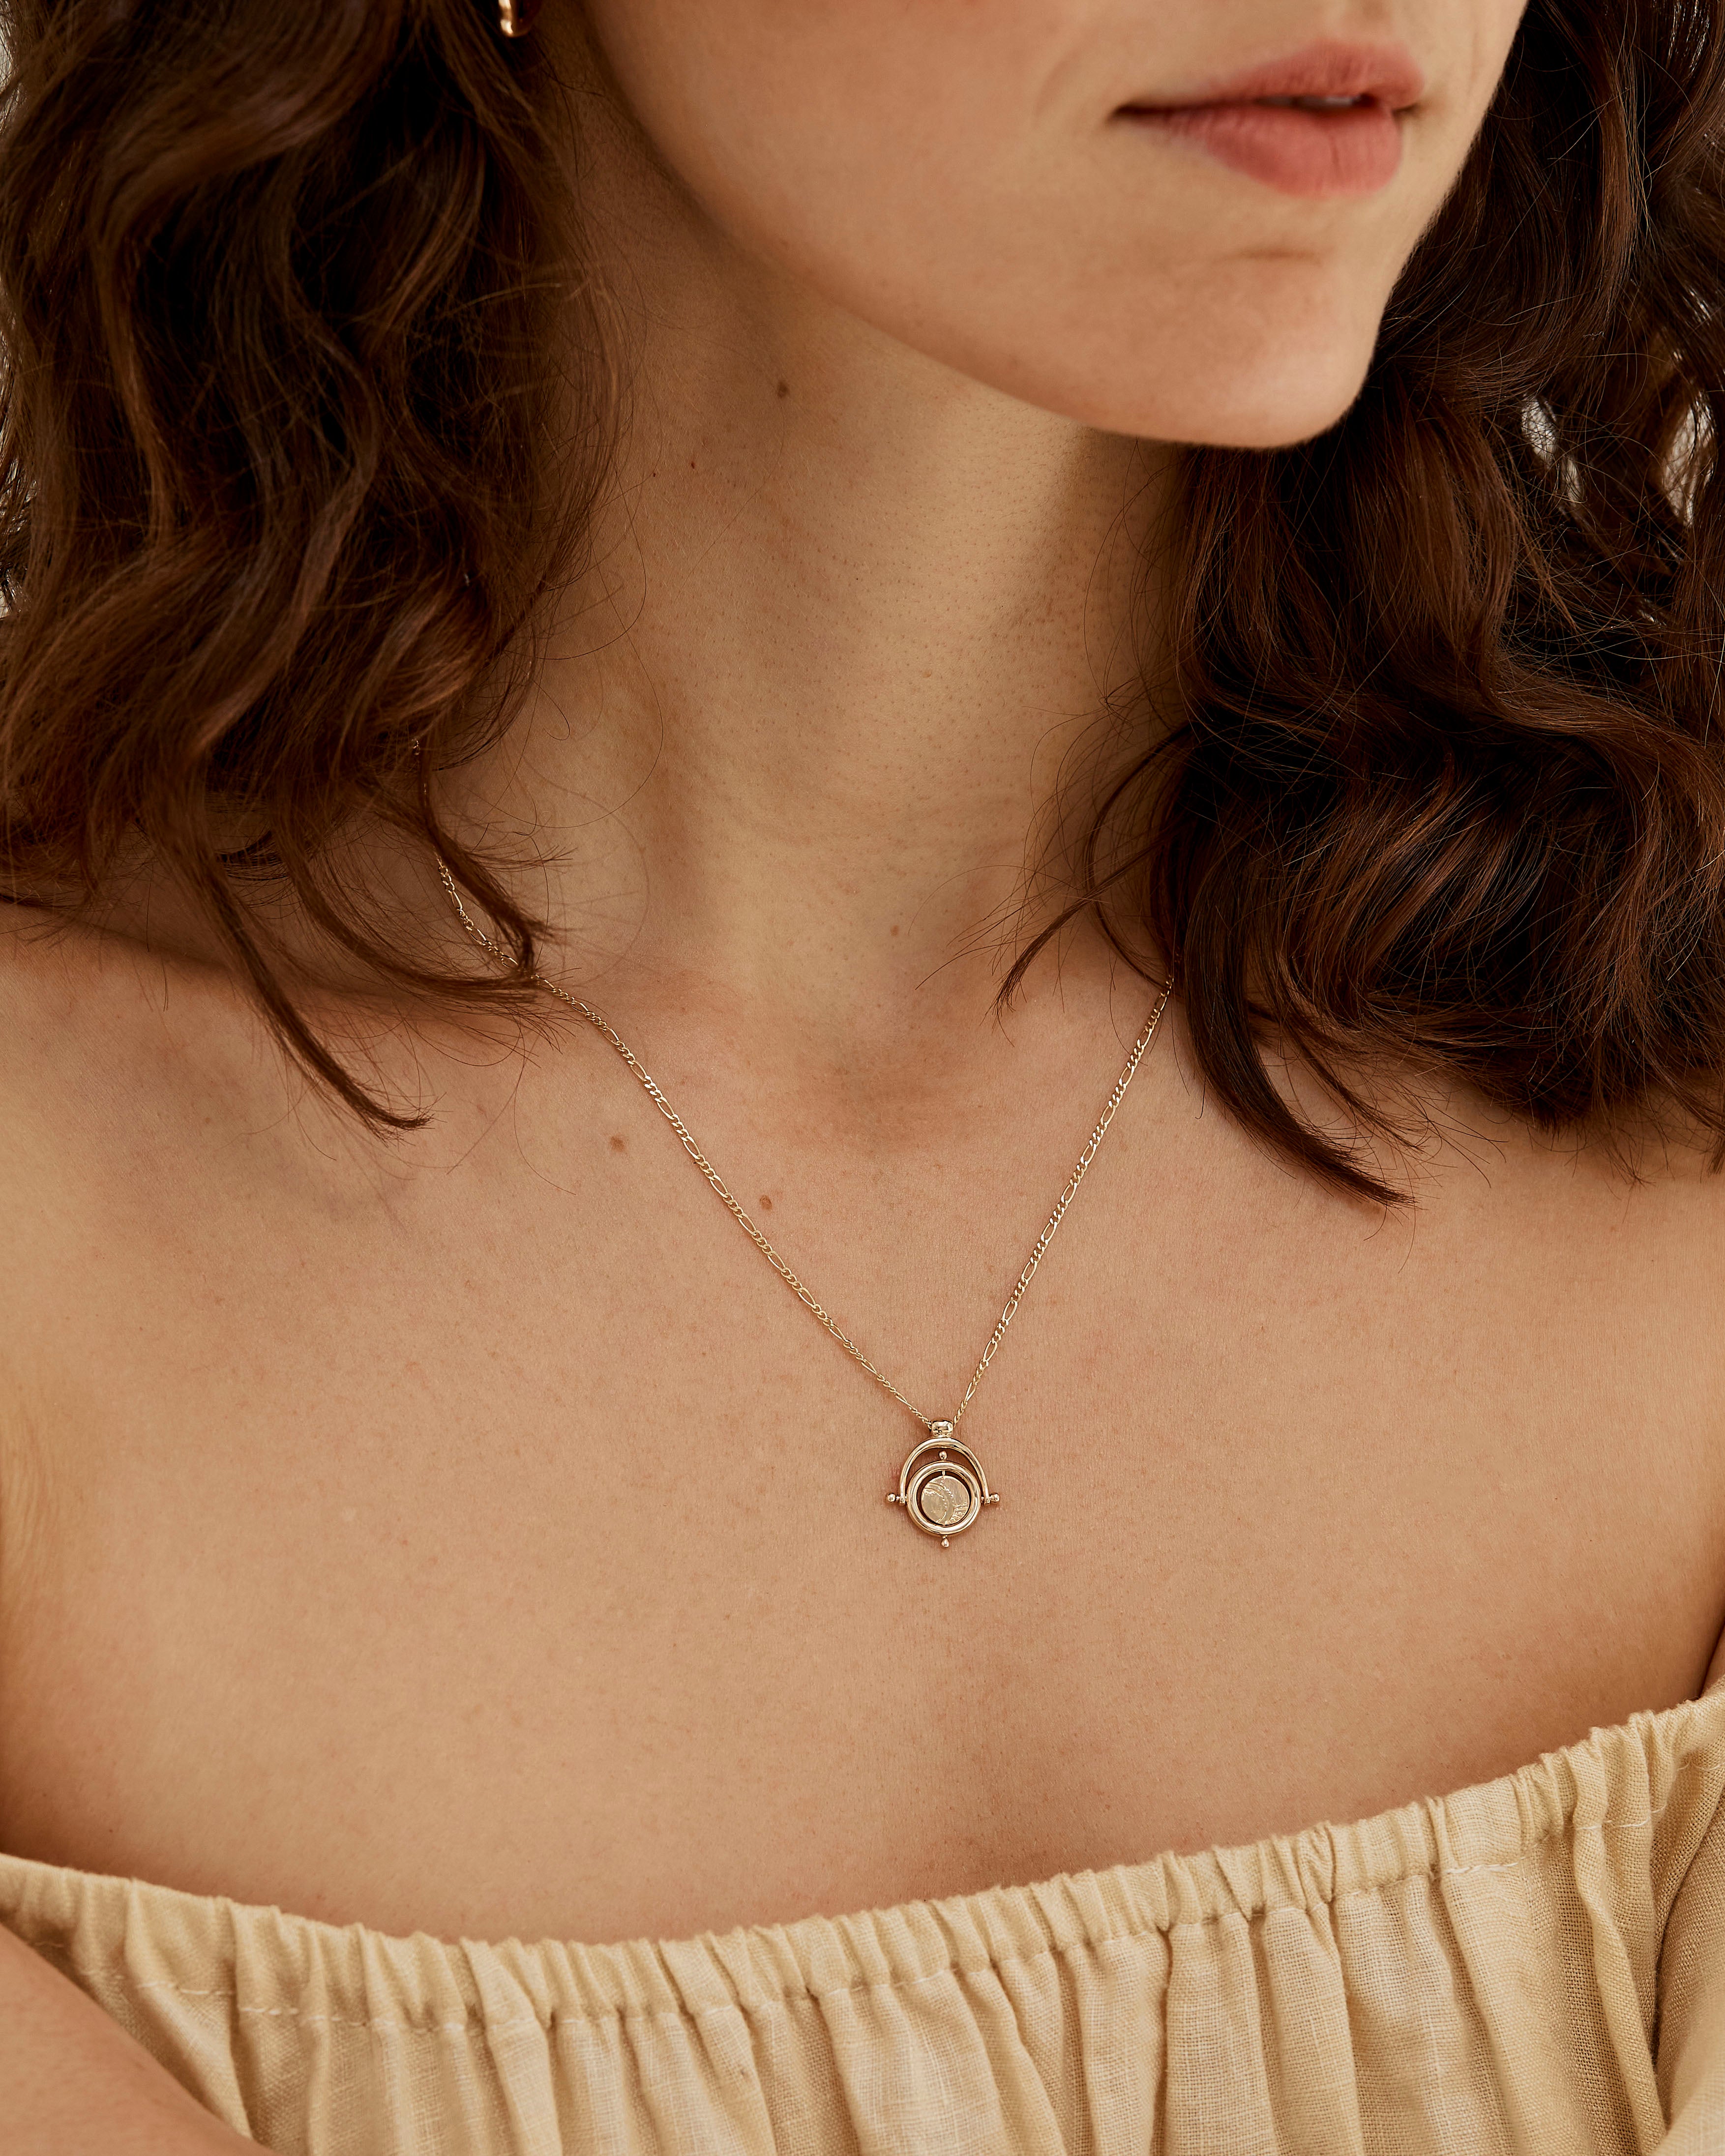 A woman wearing the Sollune Necklace in yellow gold.